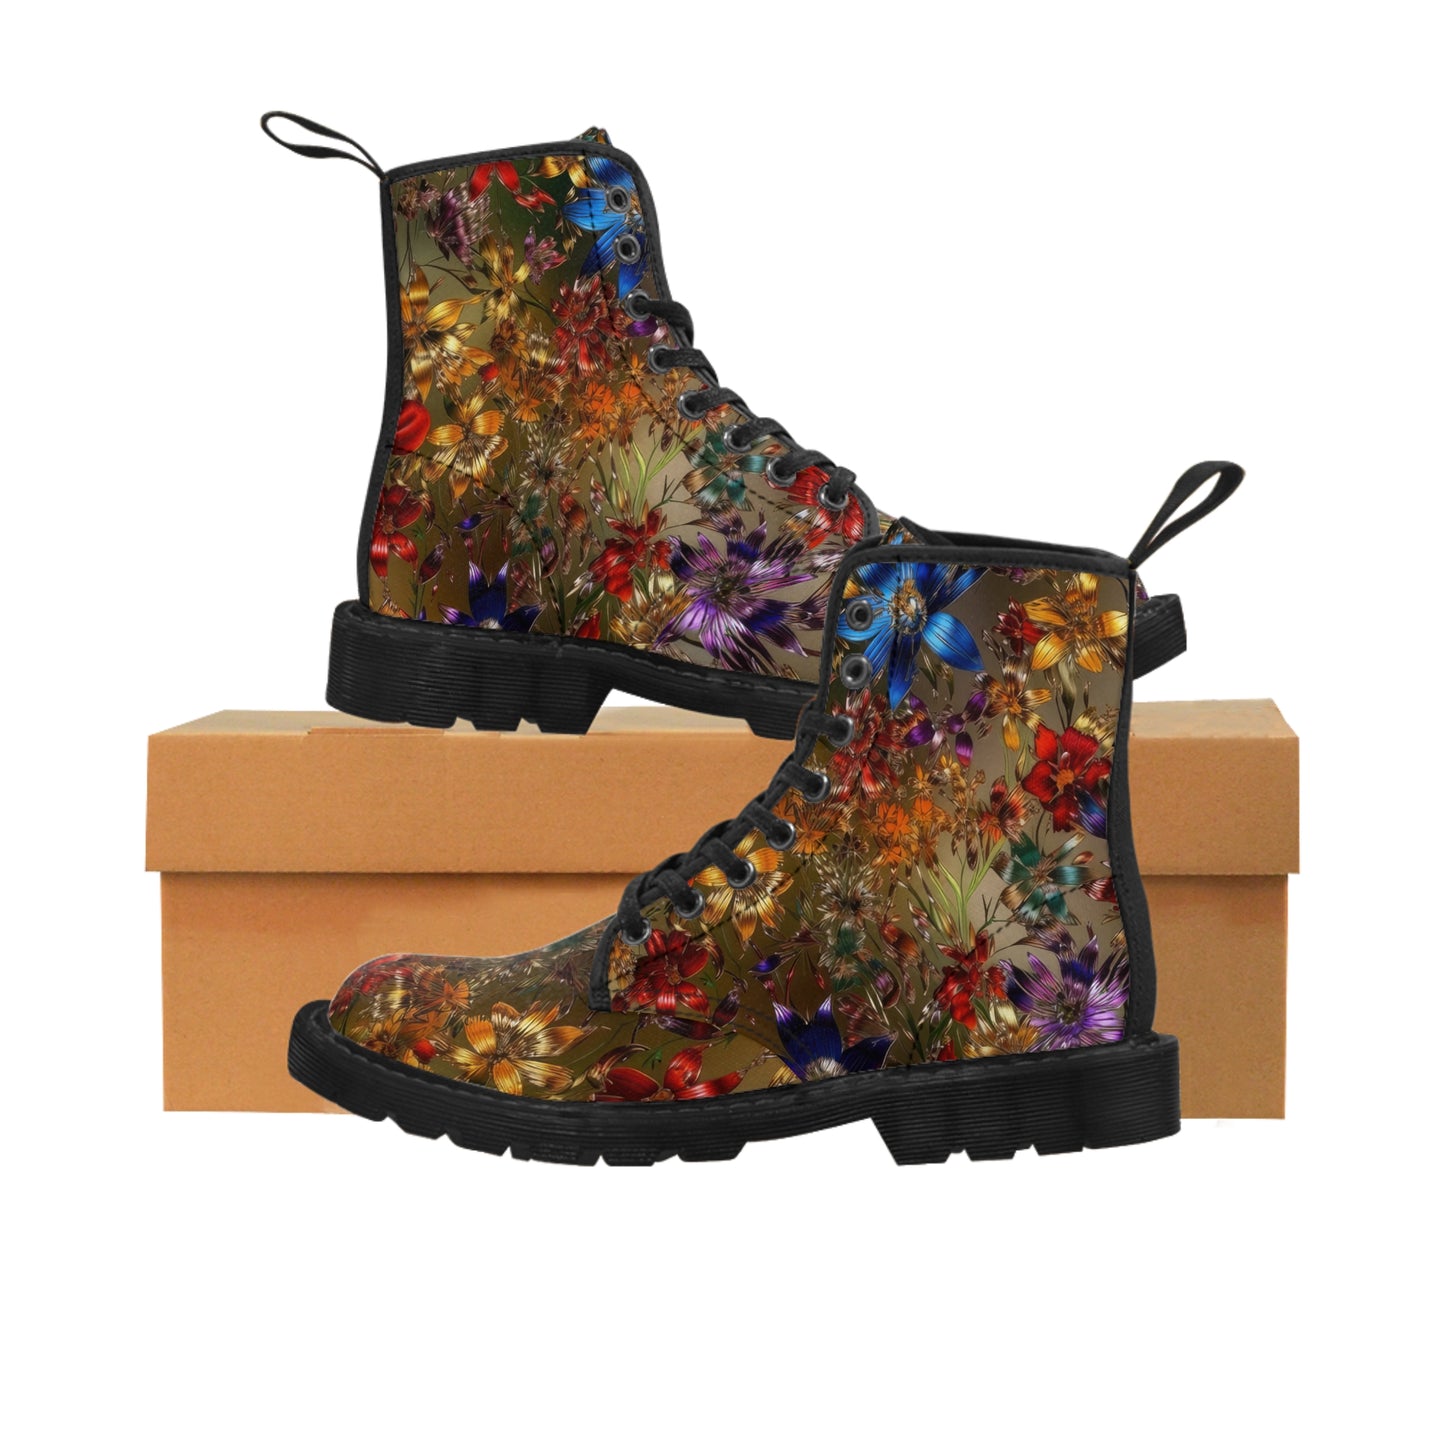 Bold & Beautiful & Metallic Wildflowers, Gorgeous floral Design, Style 1 A Women's Canvas Boots